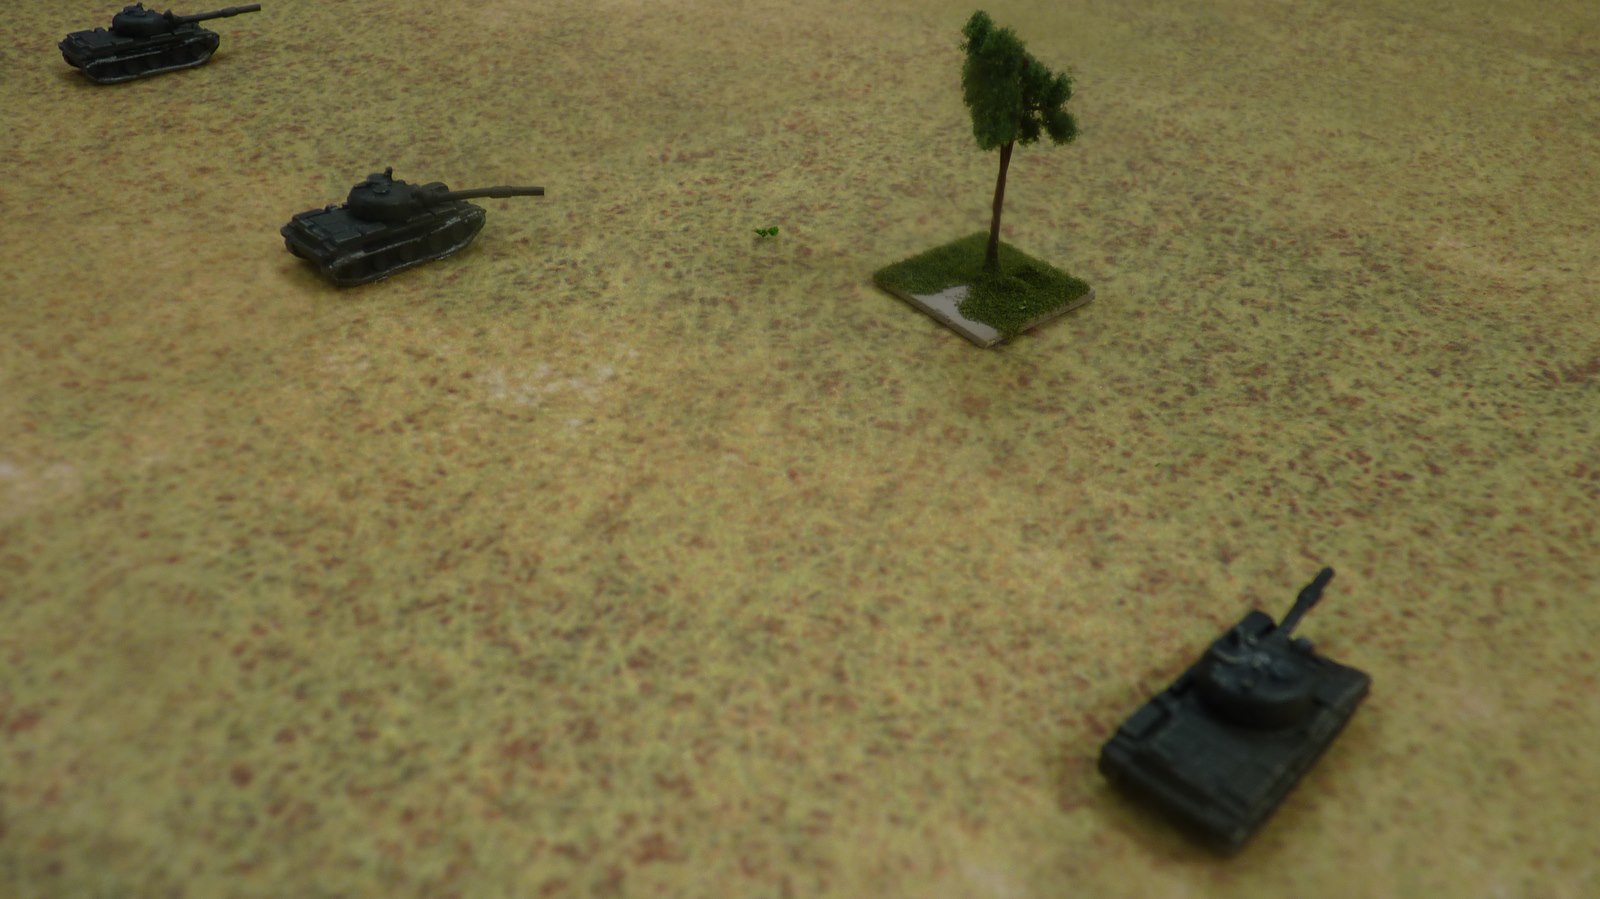 Angolan tanks advance in the open looking for targets